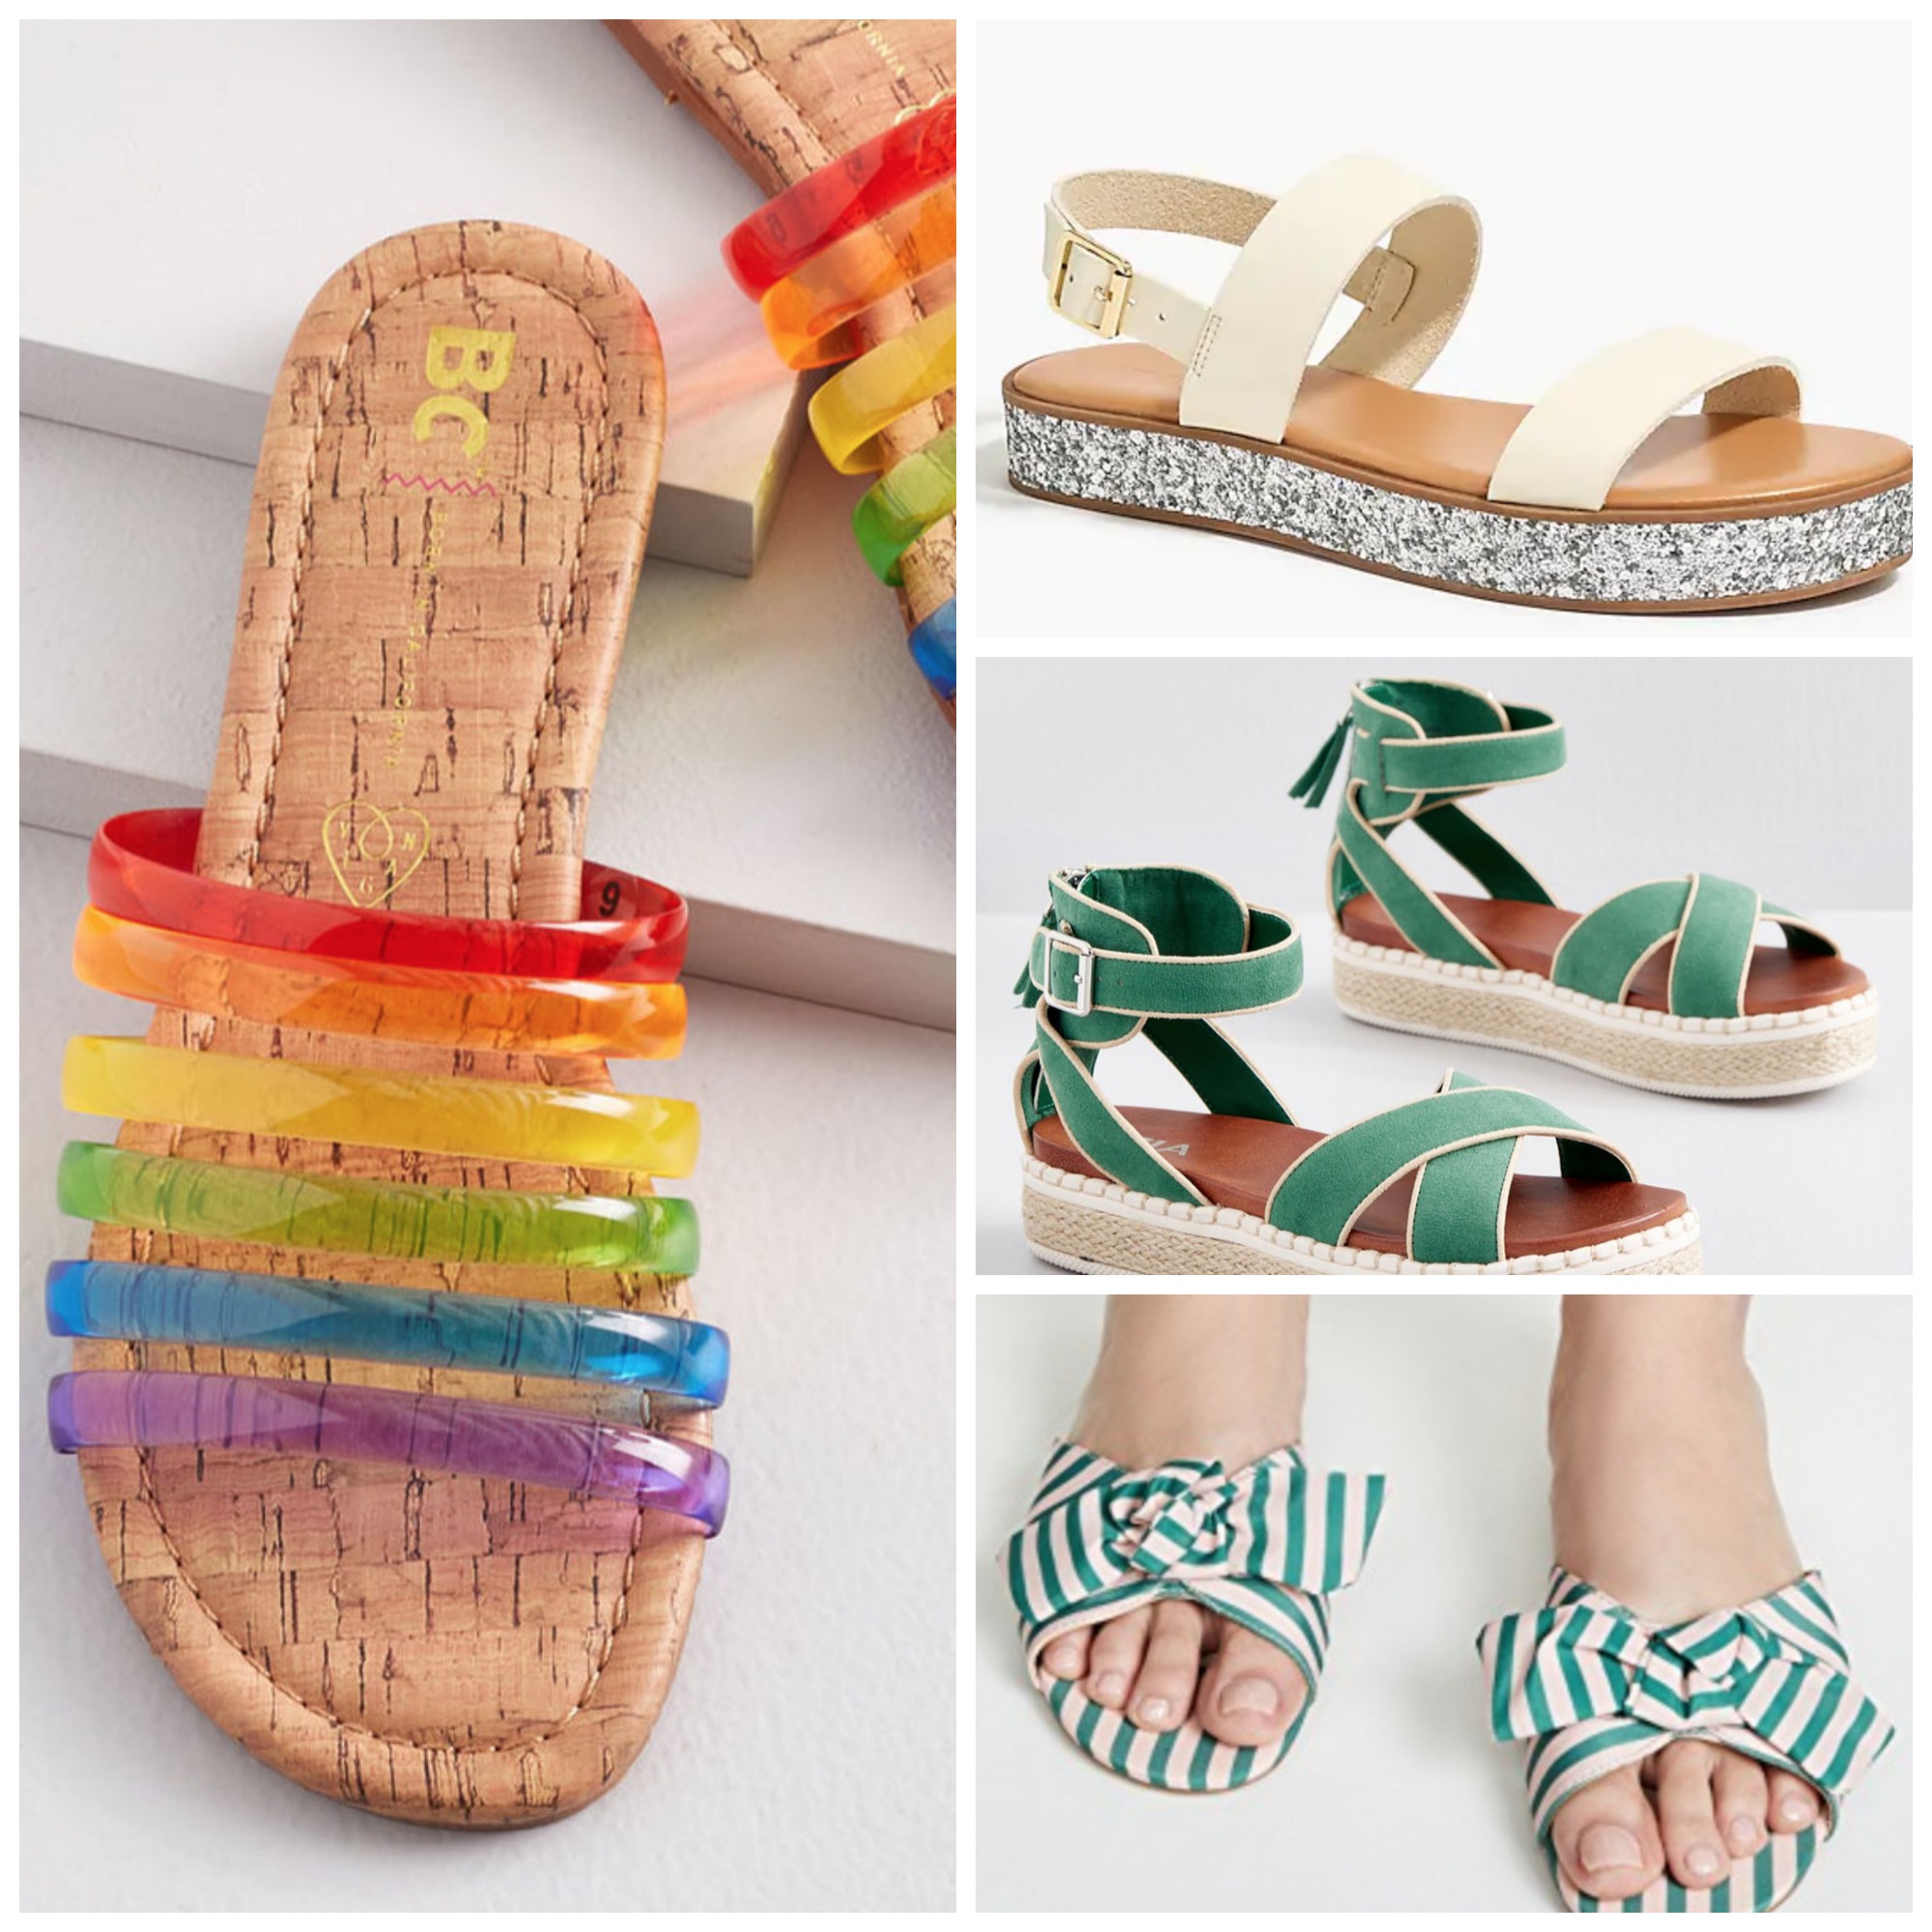 where to get cute sandals